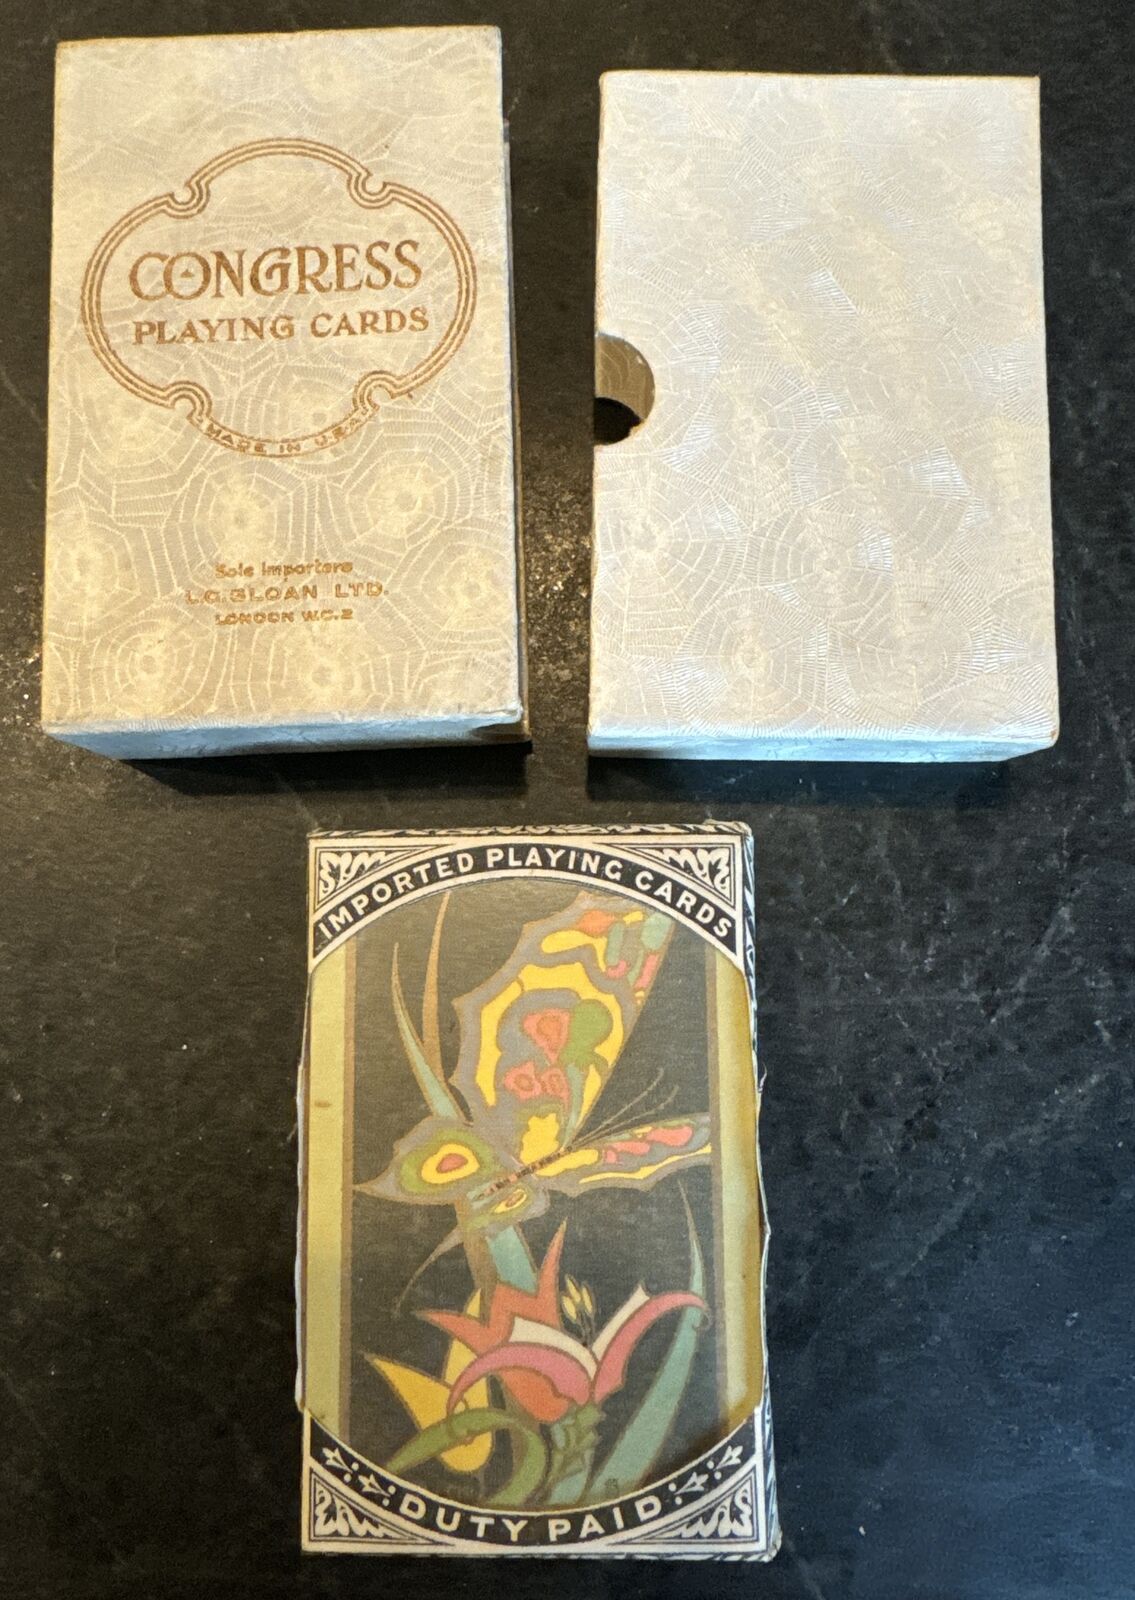 Sealed Vintage Antique Playing Cards Congress Papillon USPC Imported Duty Paid 